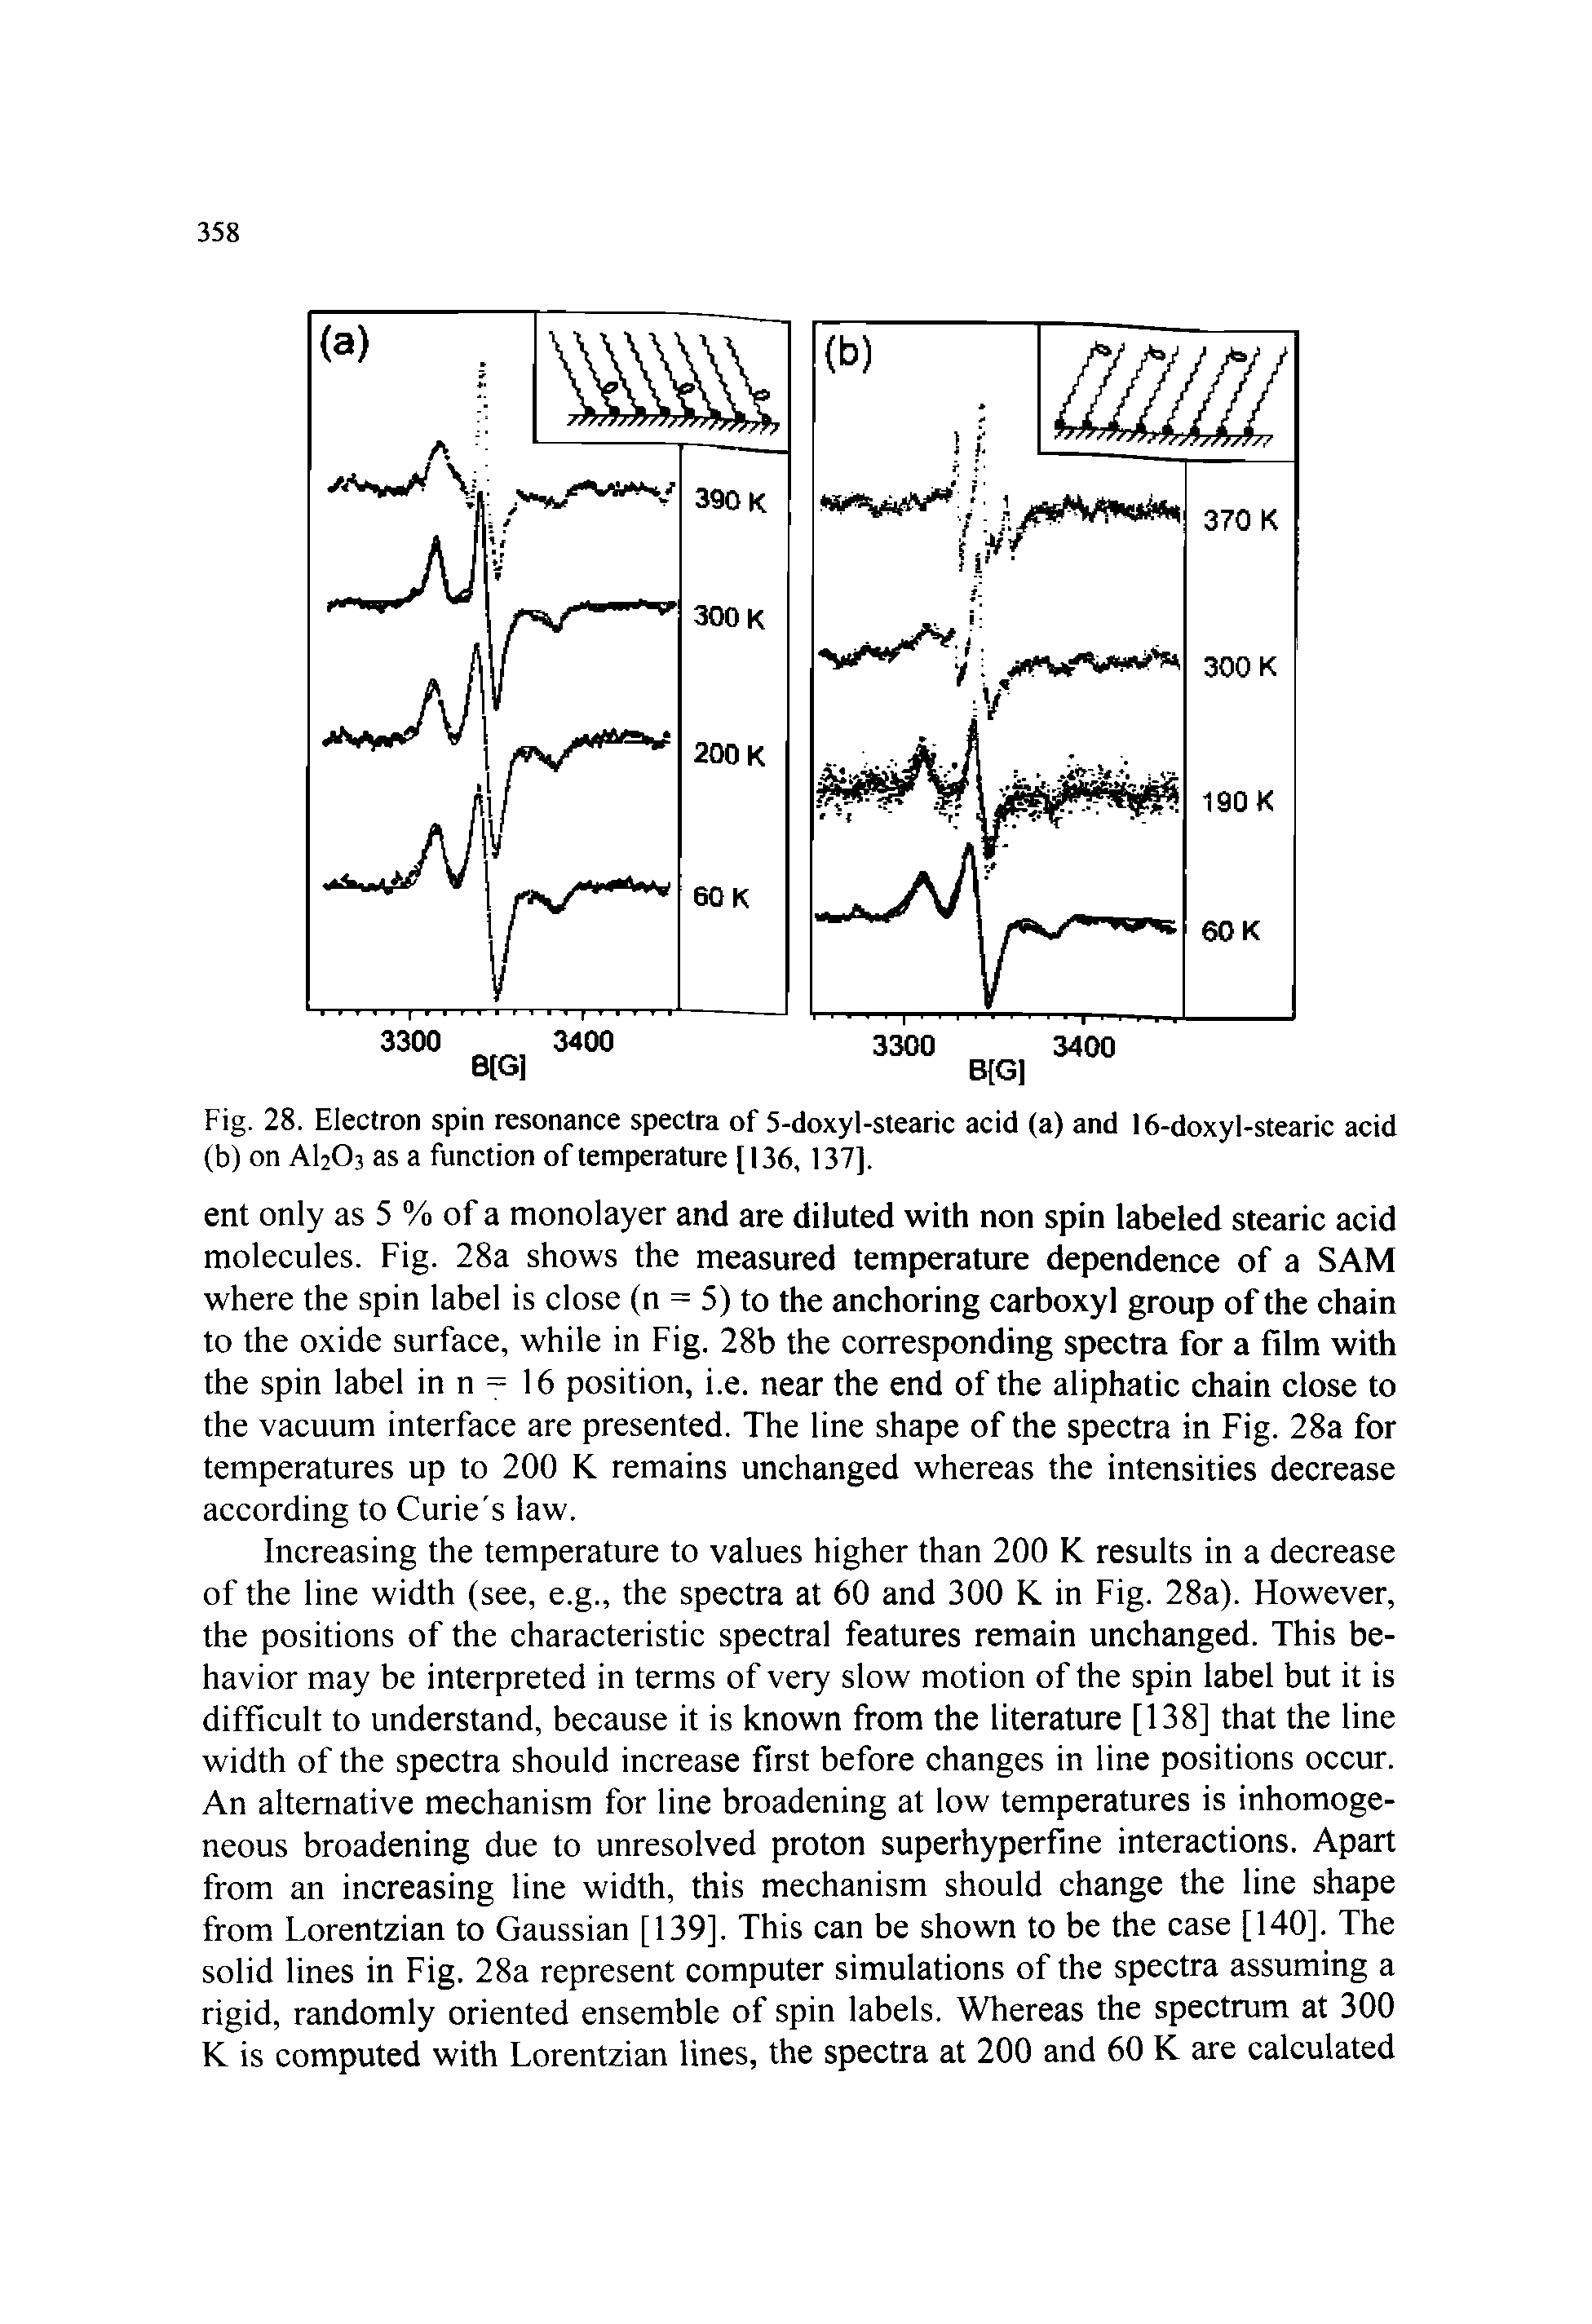 Fig. 28. Electron spin resonance spectra of 5-doxyl-stearic acid (a) and 16-doxyl-stearic acid (b) on AI2O3 as a function of temperature [136, 137].